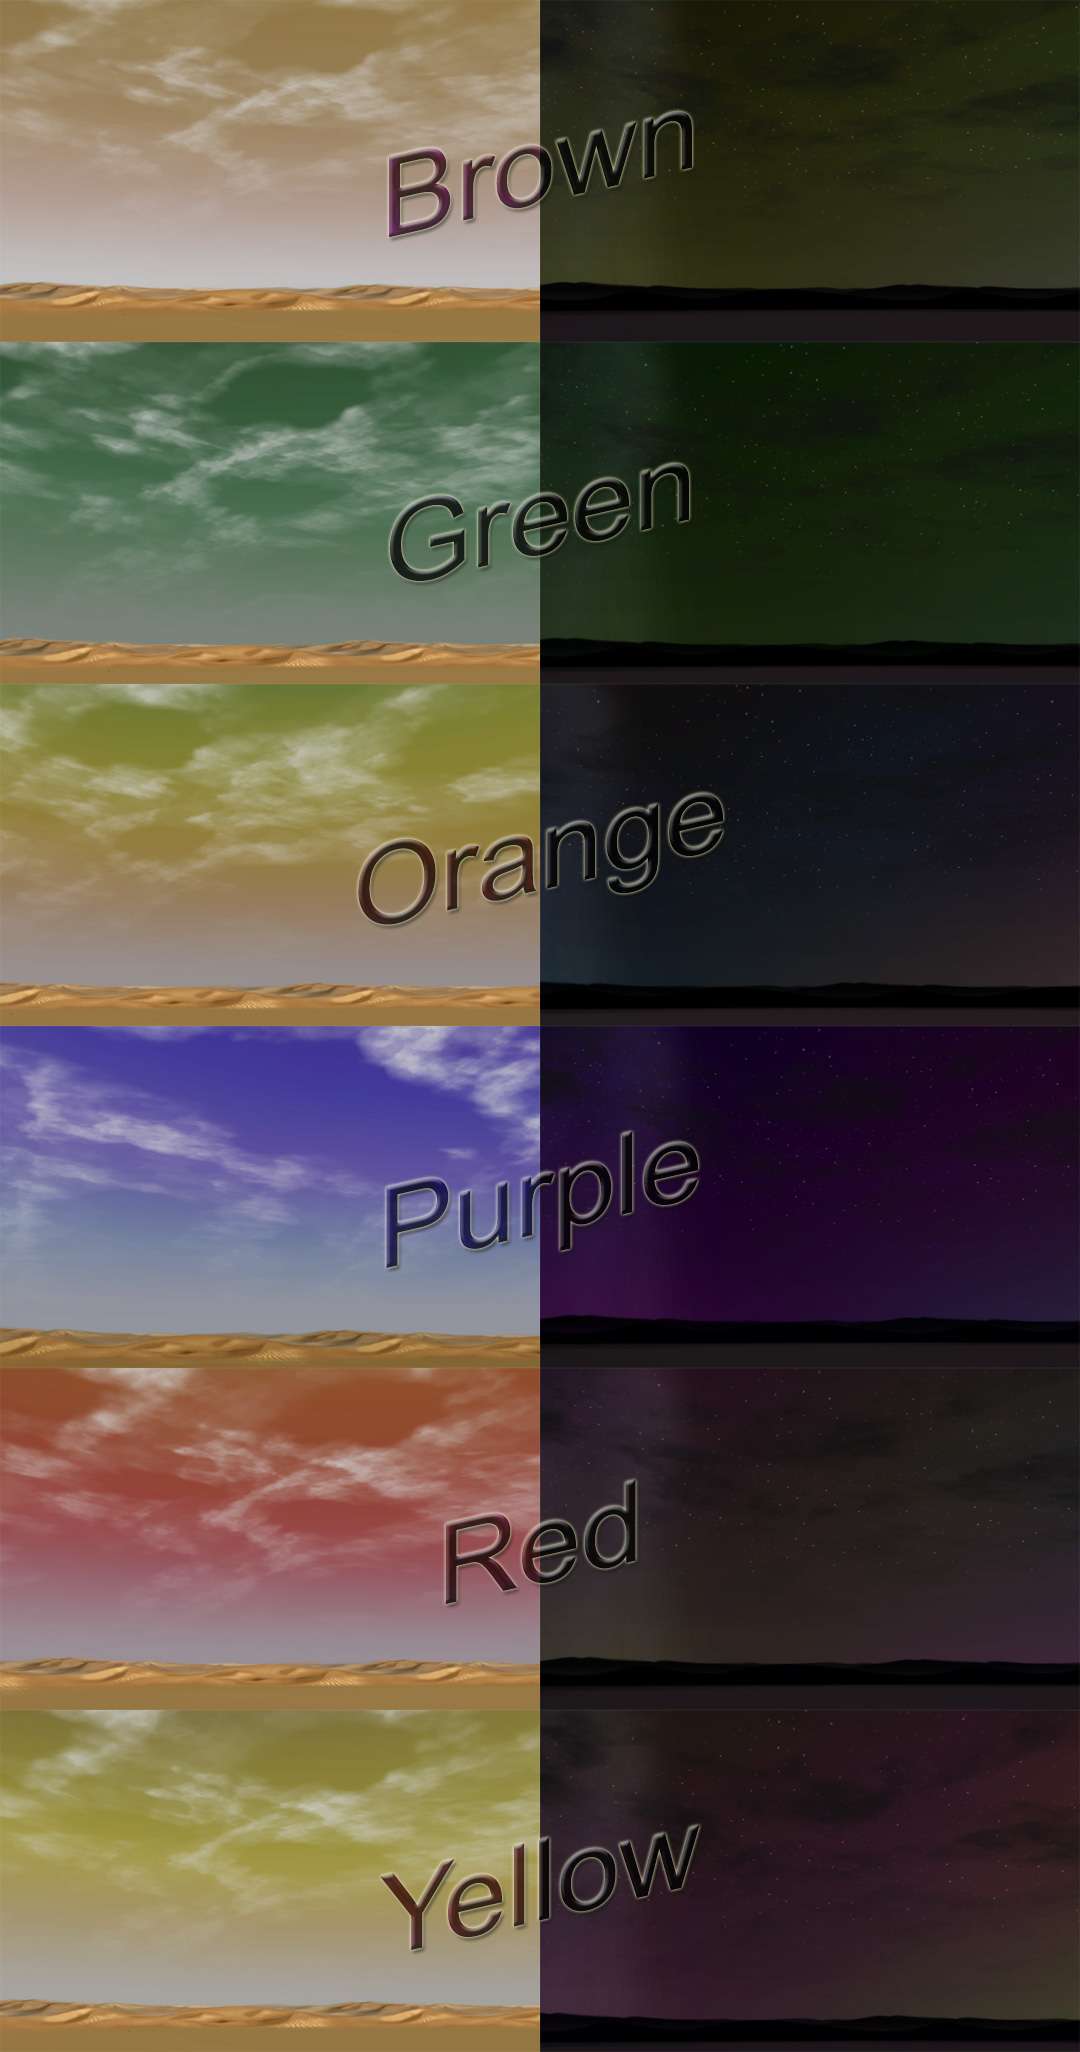 My Downloads - TexMod Packs: Outrageous TexMod Skies - Demo Screenshot Collage Displaying All Six Sky Colors, With the Day Skies on the Left Coupled With the Night Skies on the Right, Image 01